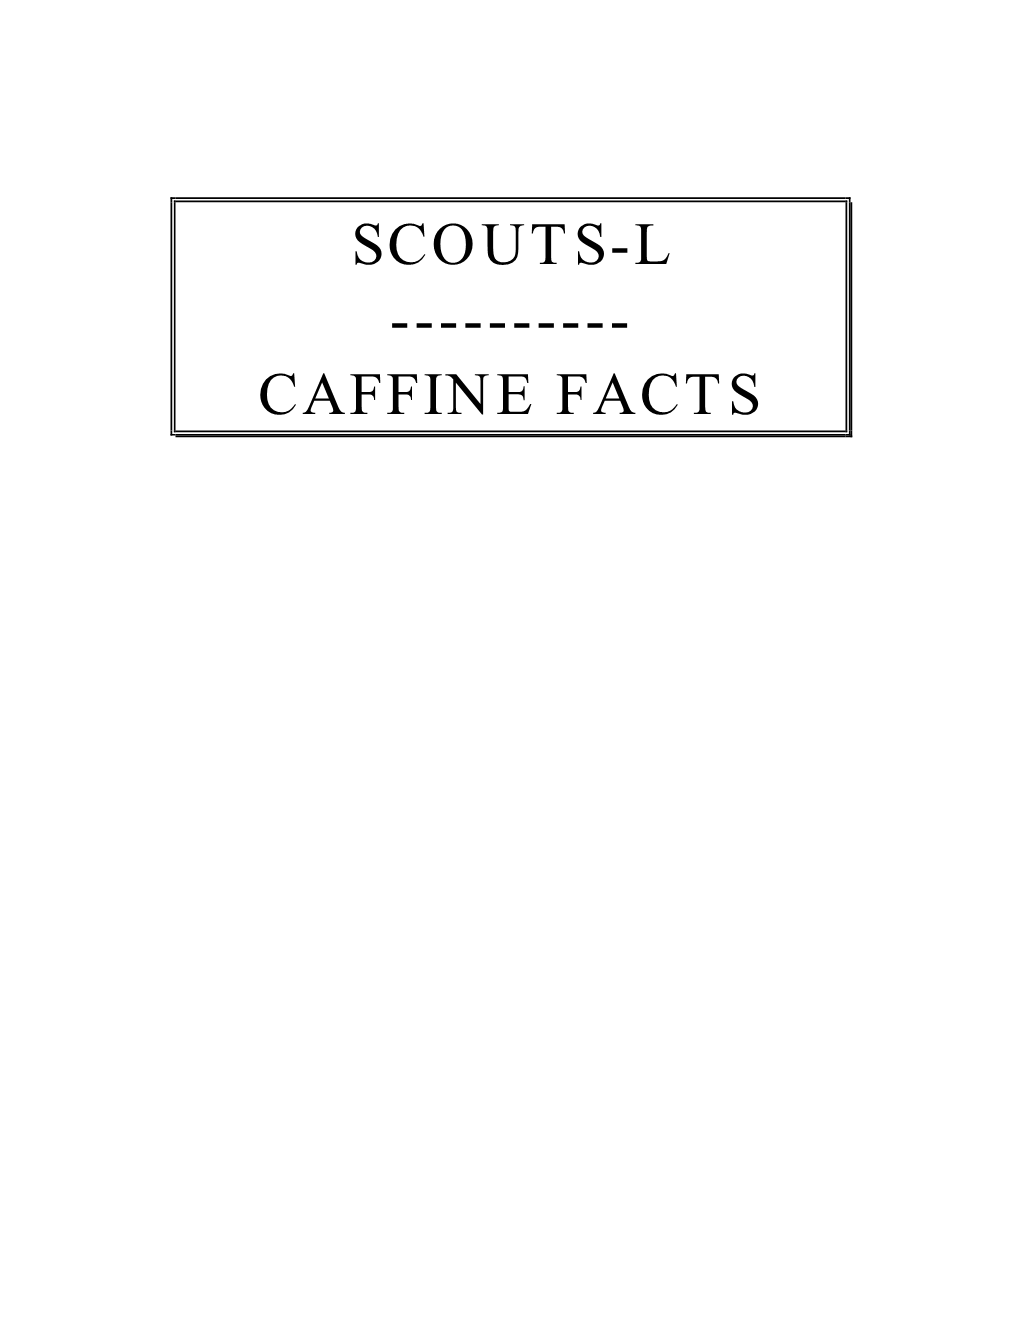 SCOUTS-L ------CAFFINE FACTS Date: Thu, 8 Feb 1996 15:17:09 -0500 From: "Paul H